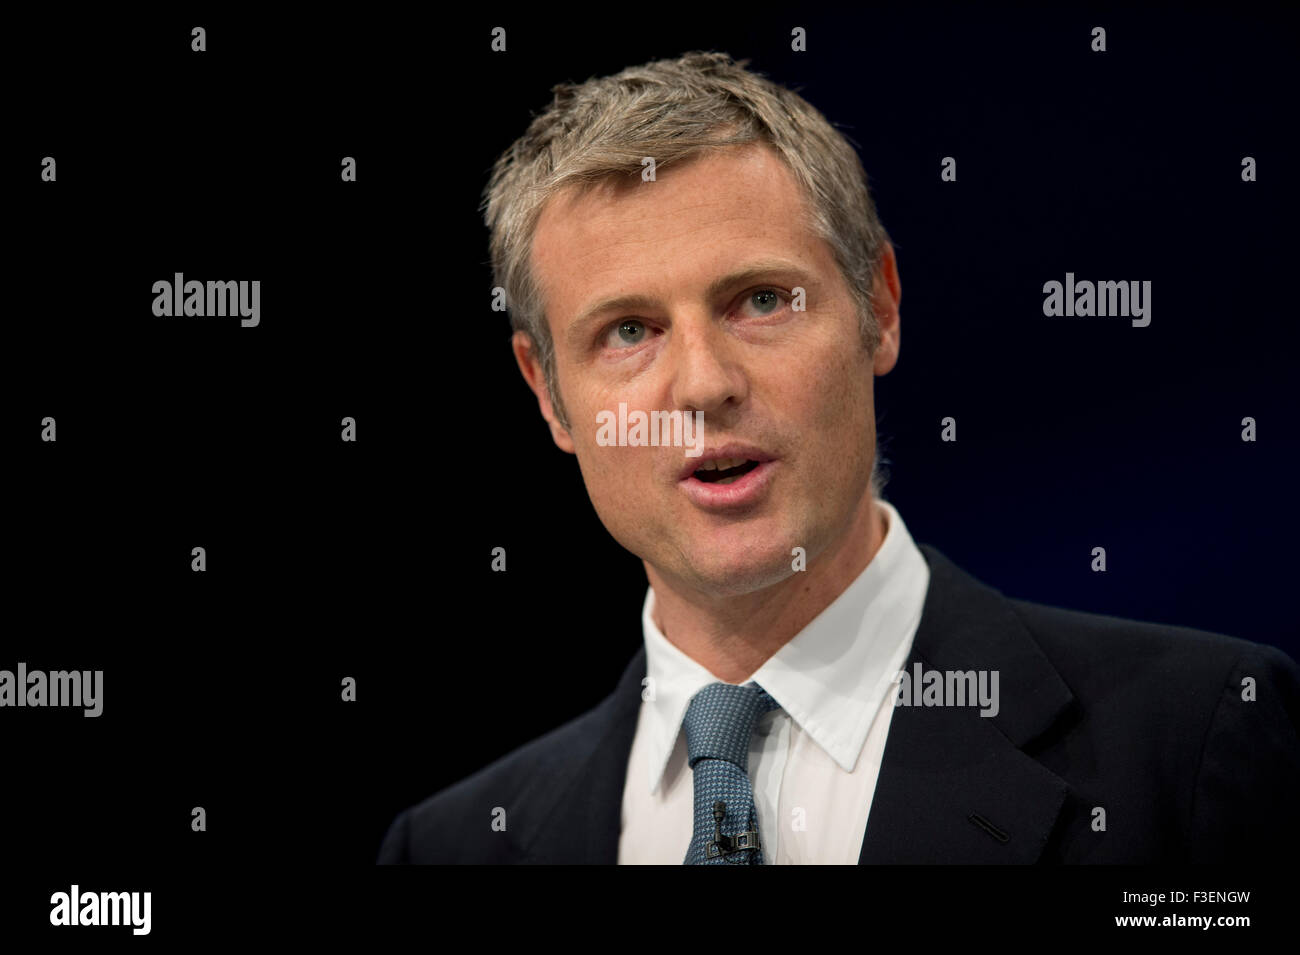 Manchester, UK. 6th October 2015. Zac Goldsmith MP, Conservative Party Candidate for London Mayor speaks at Day 3 of the 2015 Conservative Party Conference in Manchester. Credit:  Russell Hart/Alamy Live News. Stock Photo